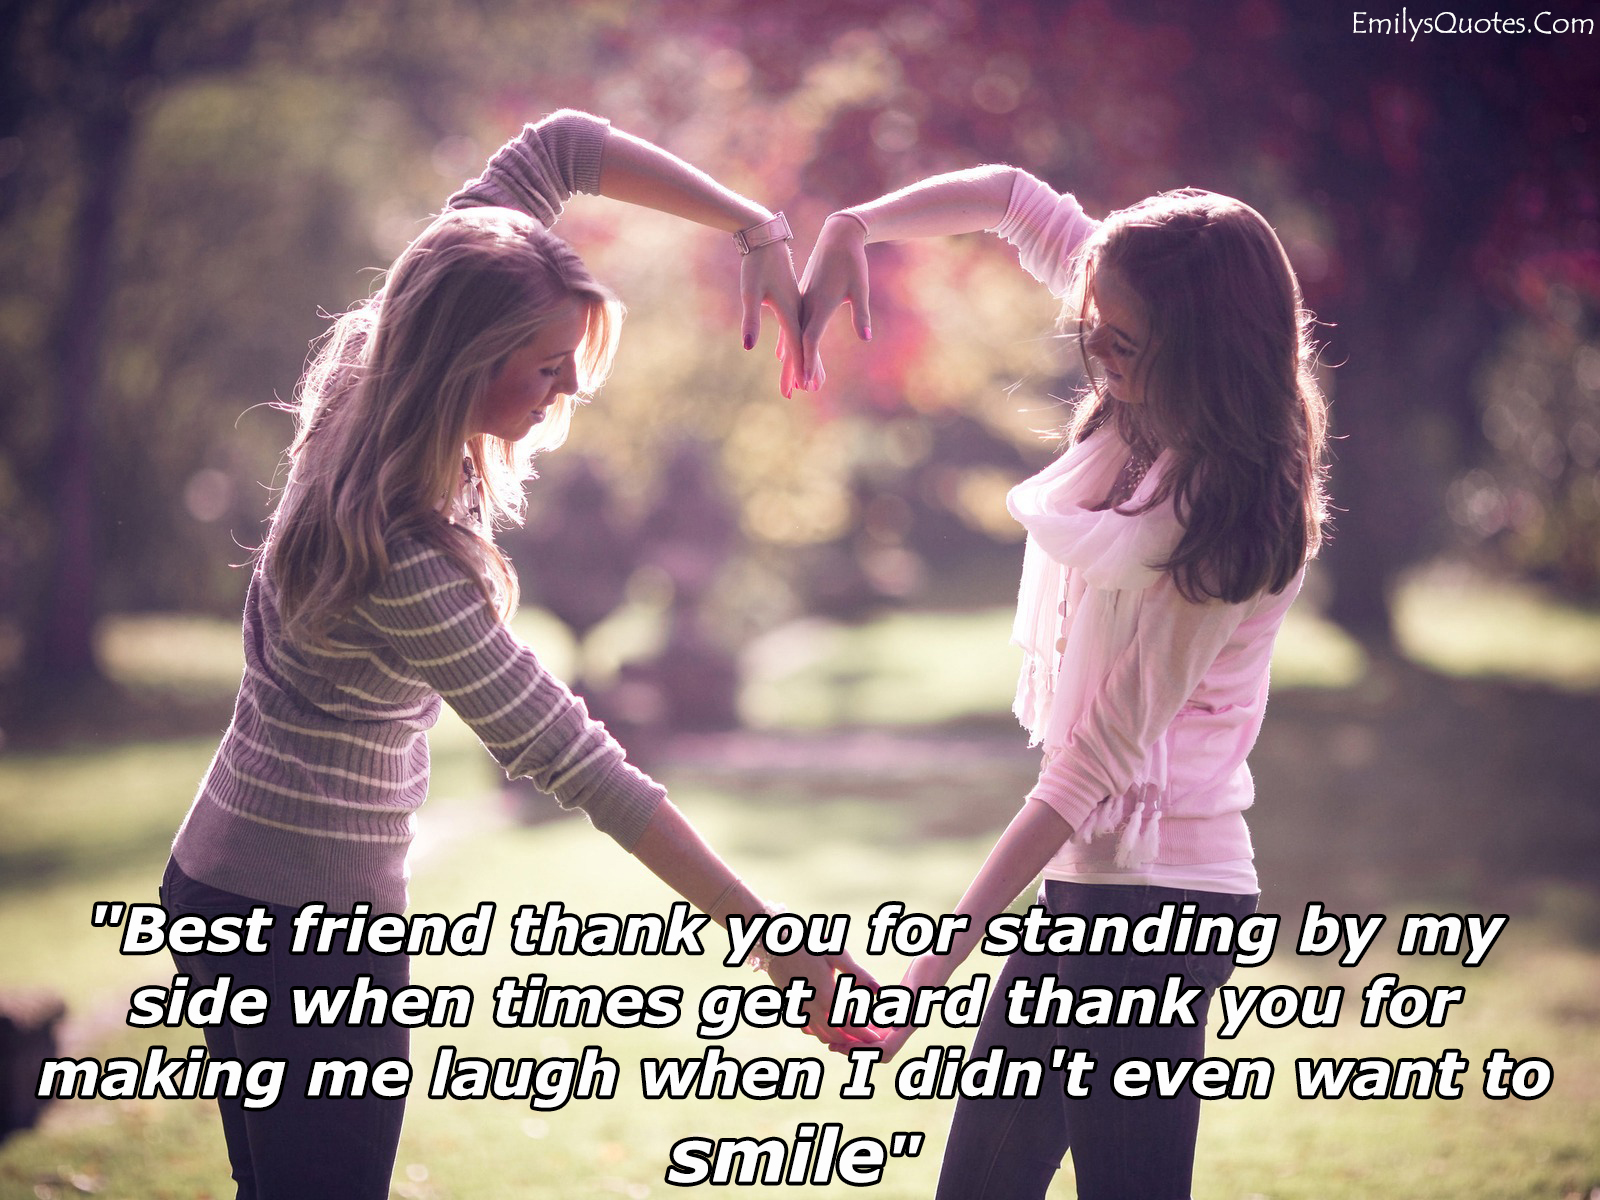 Top Best Friend Relationship Quotes in 2023 Learn more here ...